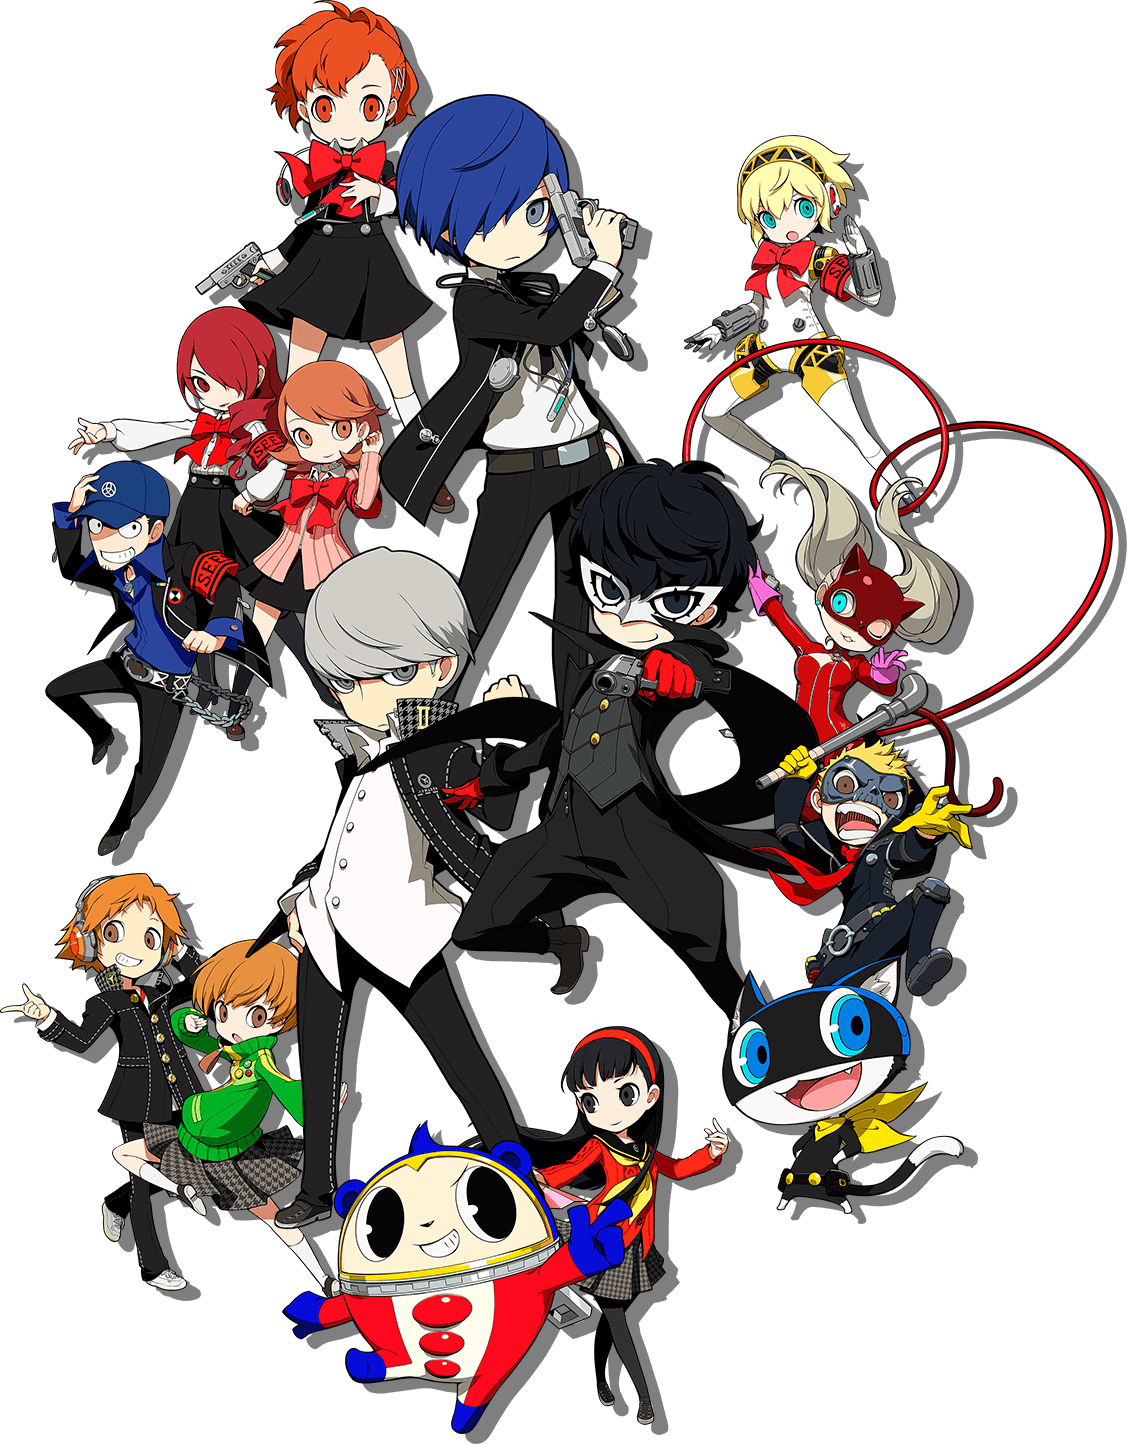 Persona Q 2: New Cinema Labyrinth first full trailer, website now